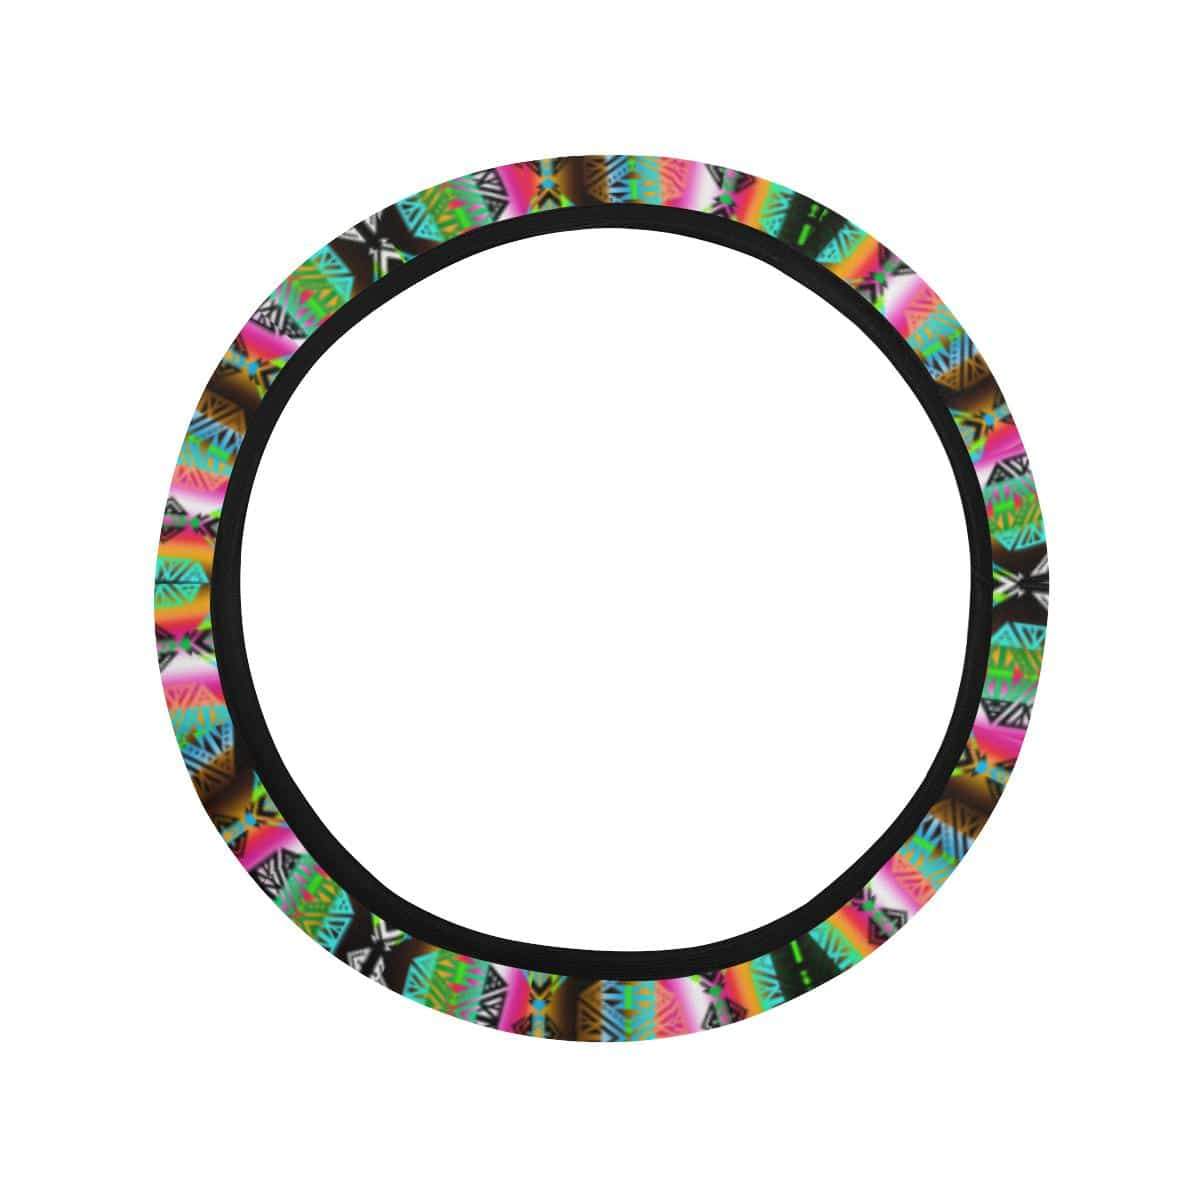 Trade Route North Steering Wheel Cover with Elastic Edge Steering Wheel Cover with Elastic Edge e-joyer 